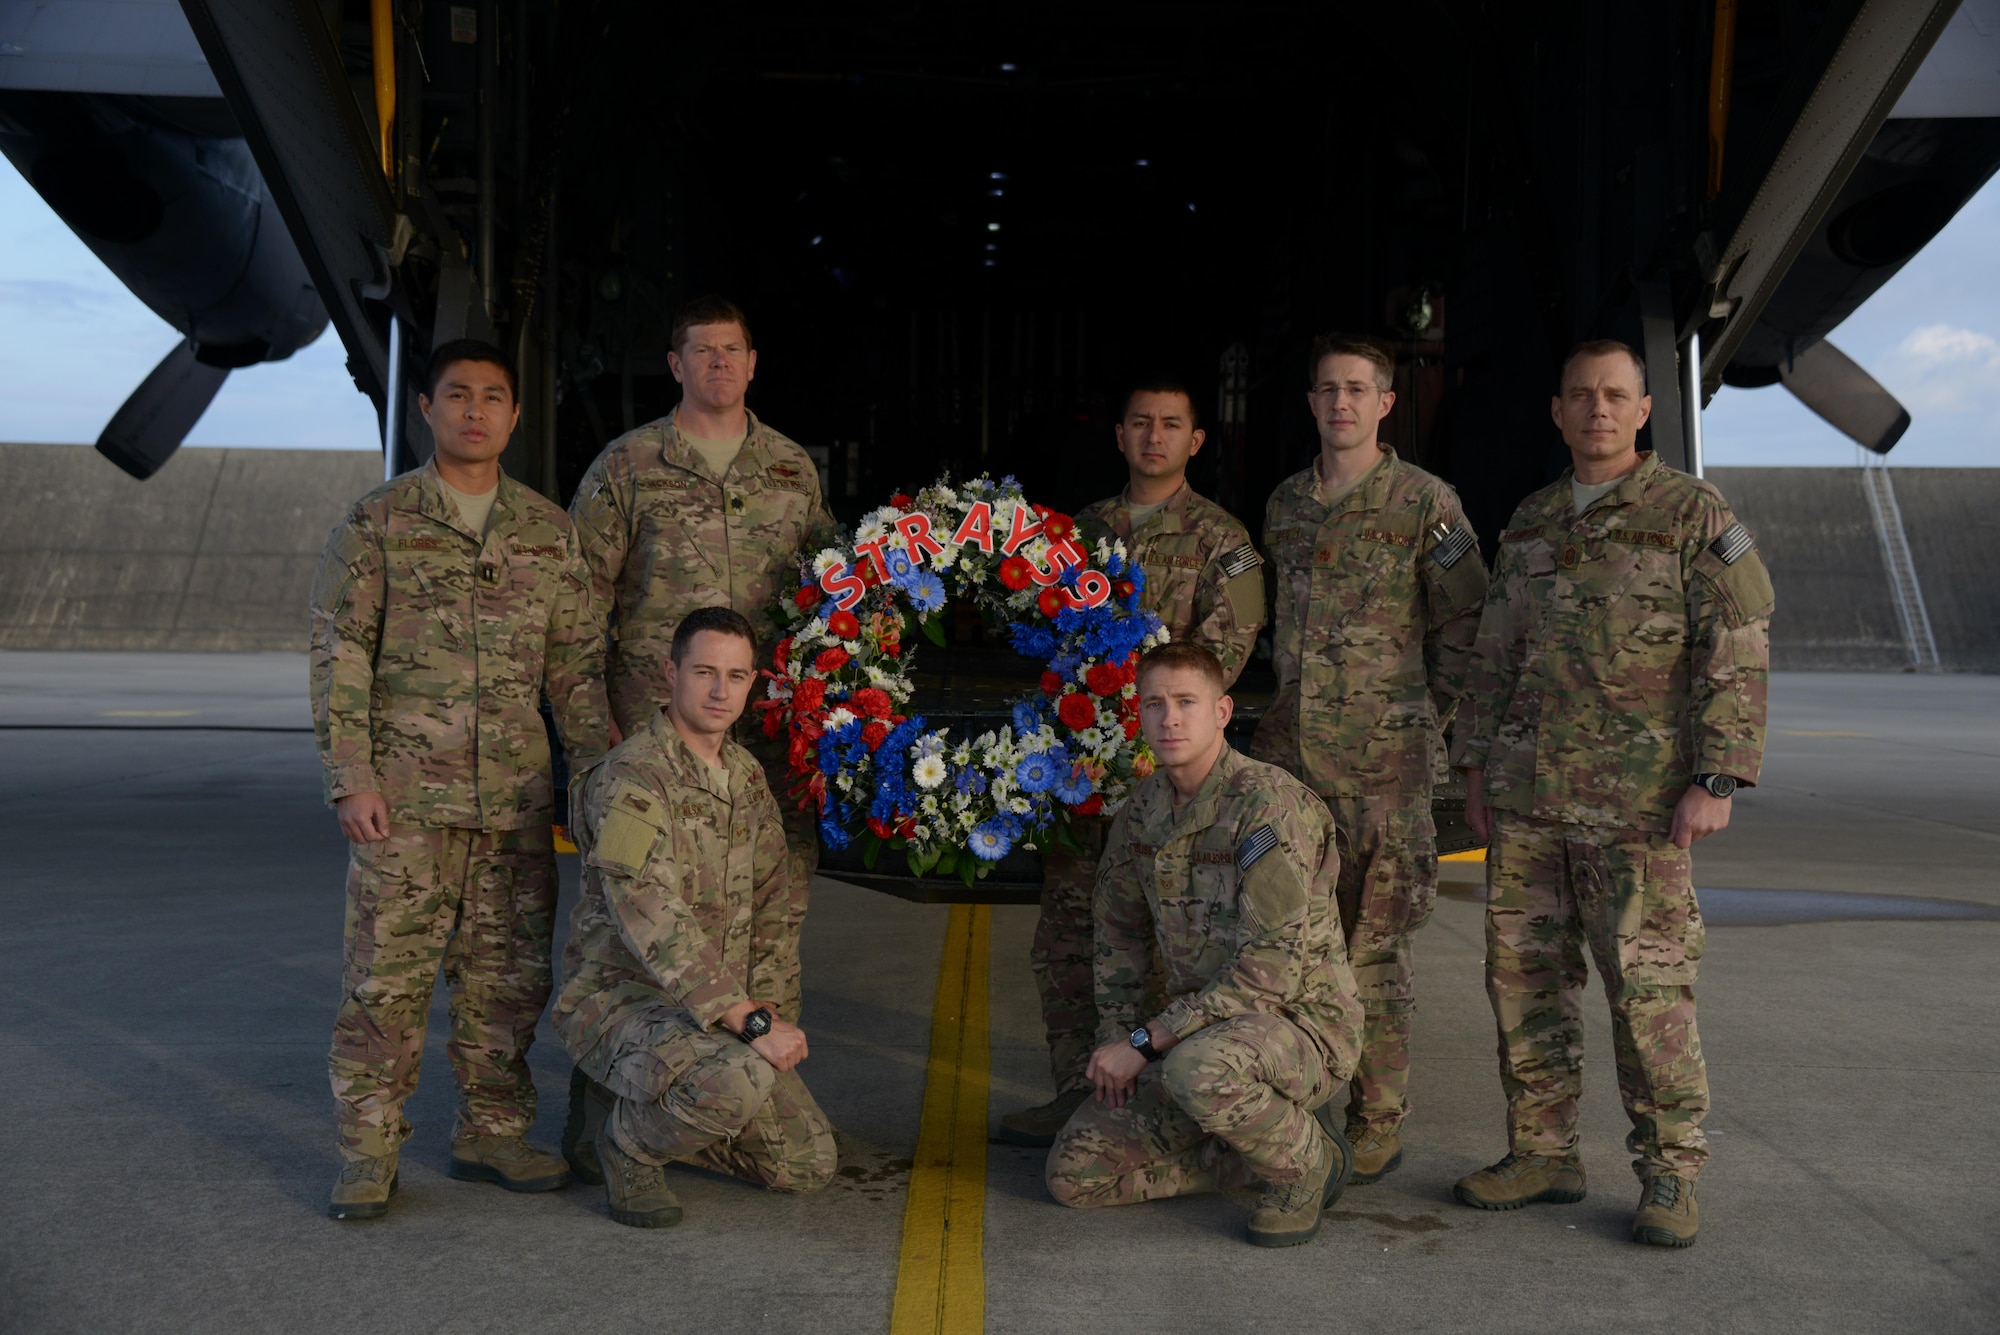 Members of the 1st Special Operations Squadron pose with a wreath that was dropped from a U.S. Air Force MC-130H Combat Talon II special operations aircraft to memorialize Stray 59 on Feb 26, 2013. Stray 59 was a 1st Special Operations Squadron U.S. Air Force MC-130E Combat Talon I special operations aircraft that crashed in 1981 near Subic Bay, Philippines, during a training mission. (U. S. Air Force photo by Tech. Sgt. Kristine Dreyer)